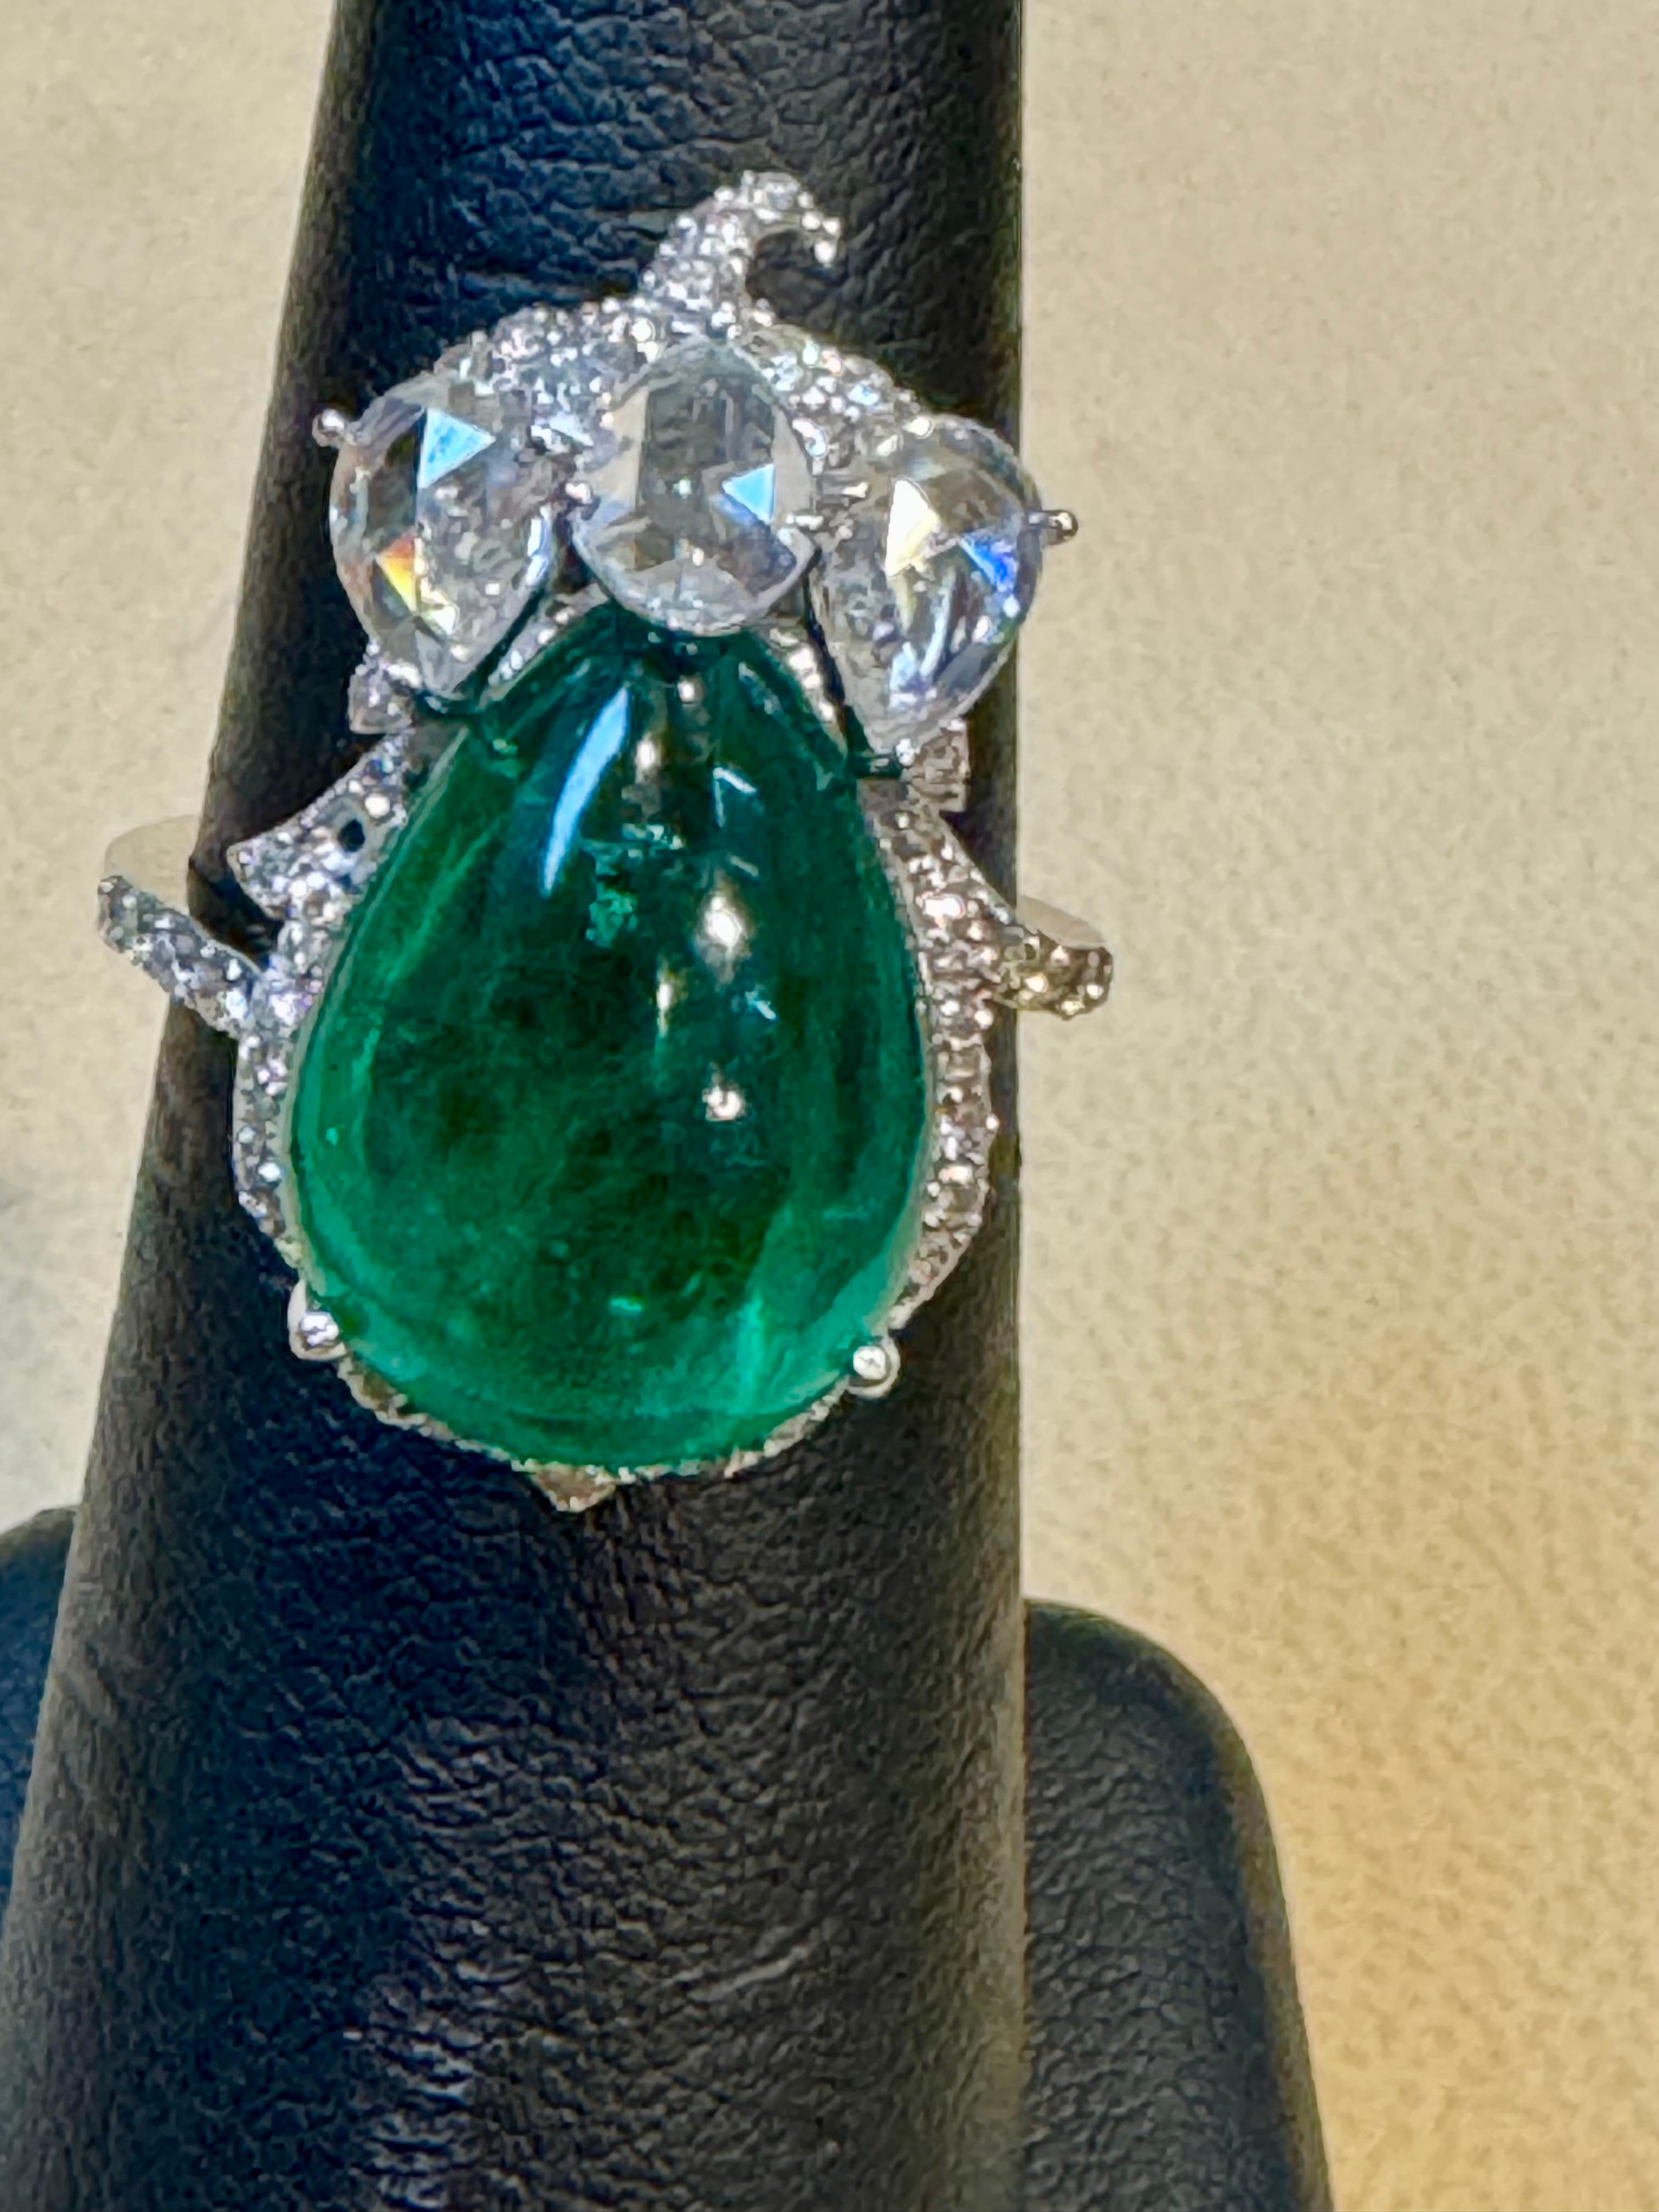 9 Ct Finest Zambian Sugar Loaf Emerald & 2 Ct Rose Cut Diamond Ring Size 7 For Sale 1